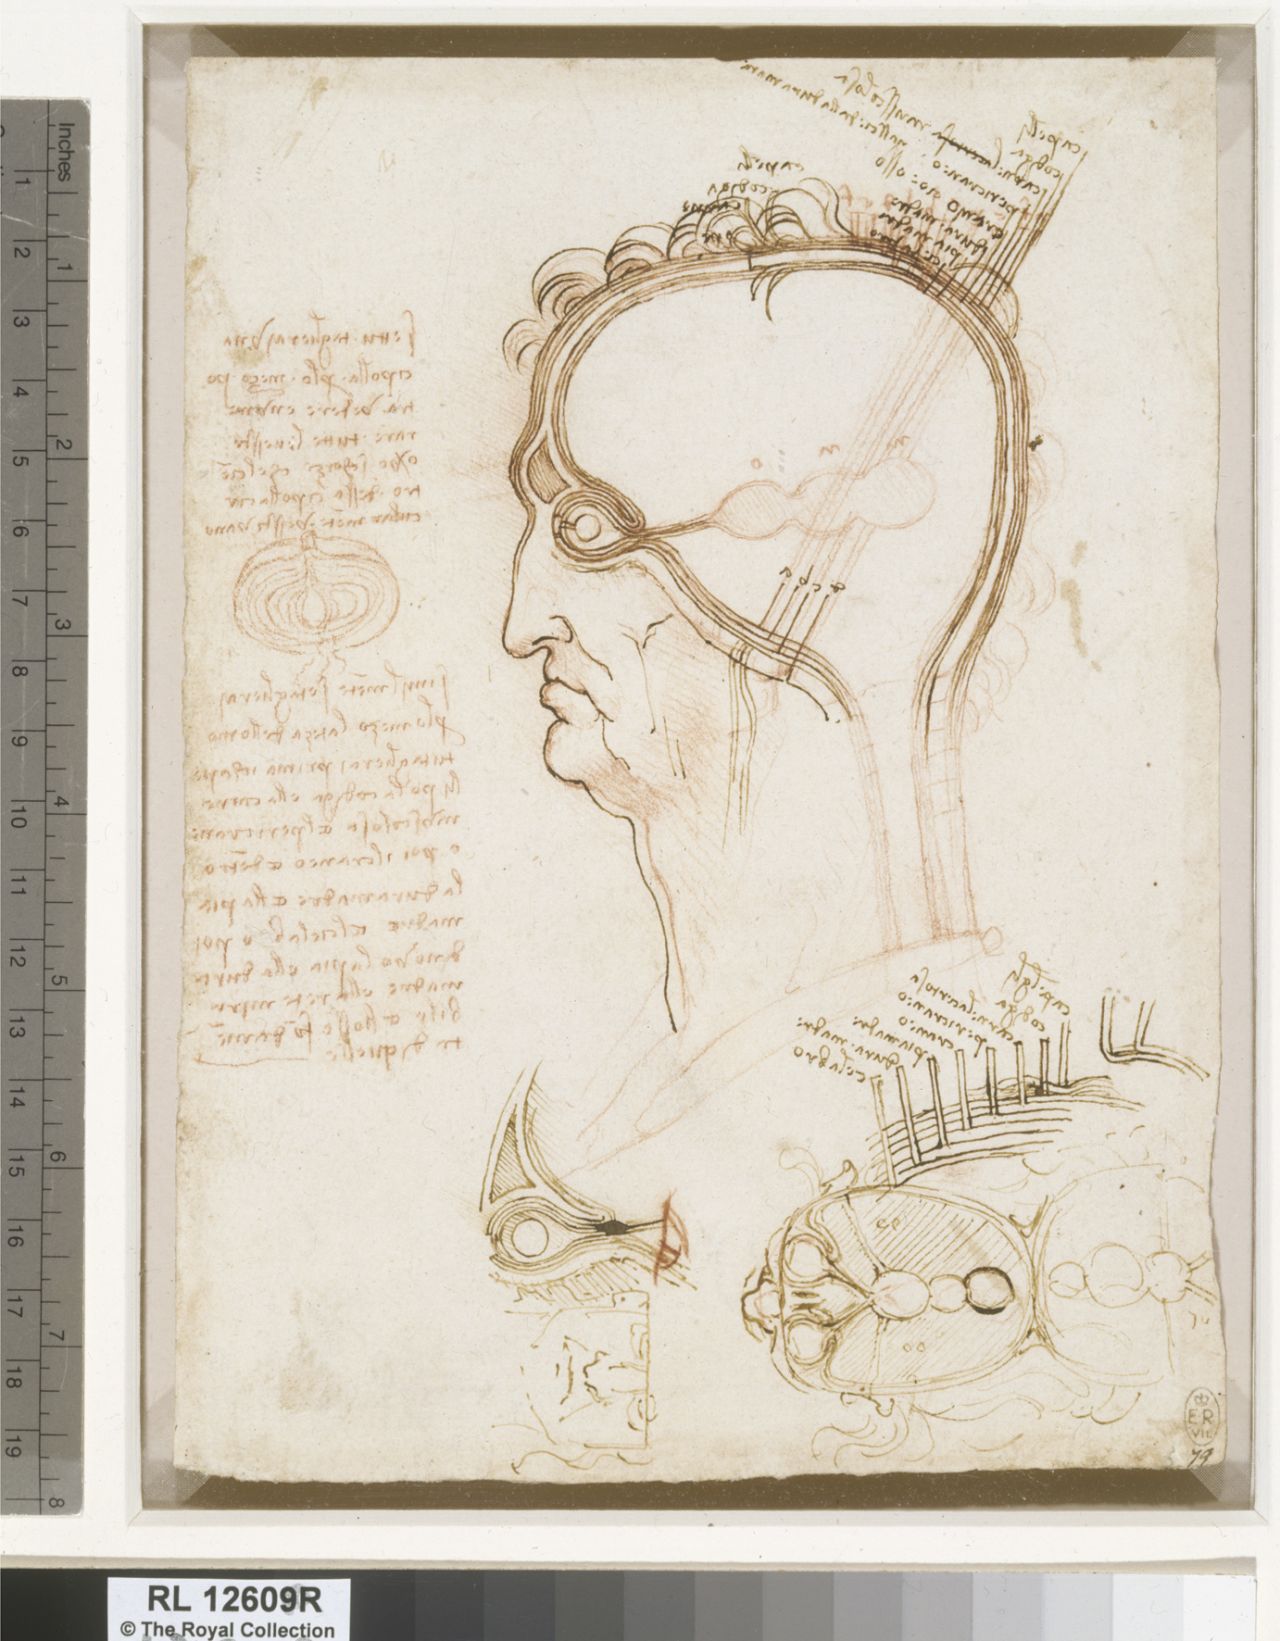 The show also contains drawings by Leonardo da Vinci, including this anatomical drawing of the ventricles of the brain and the layers of the scalp (c. 1490-4)